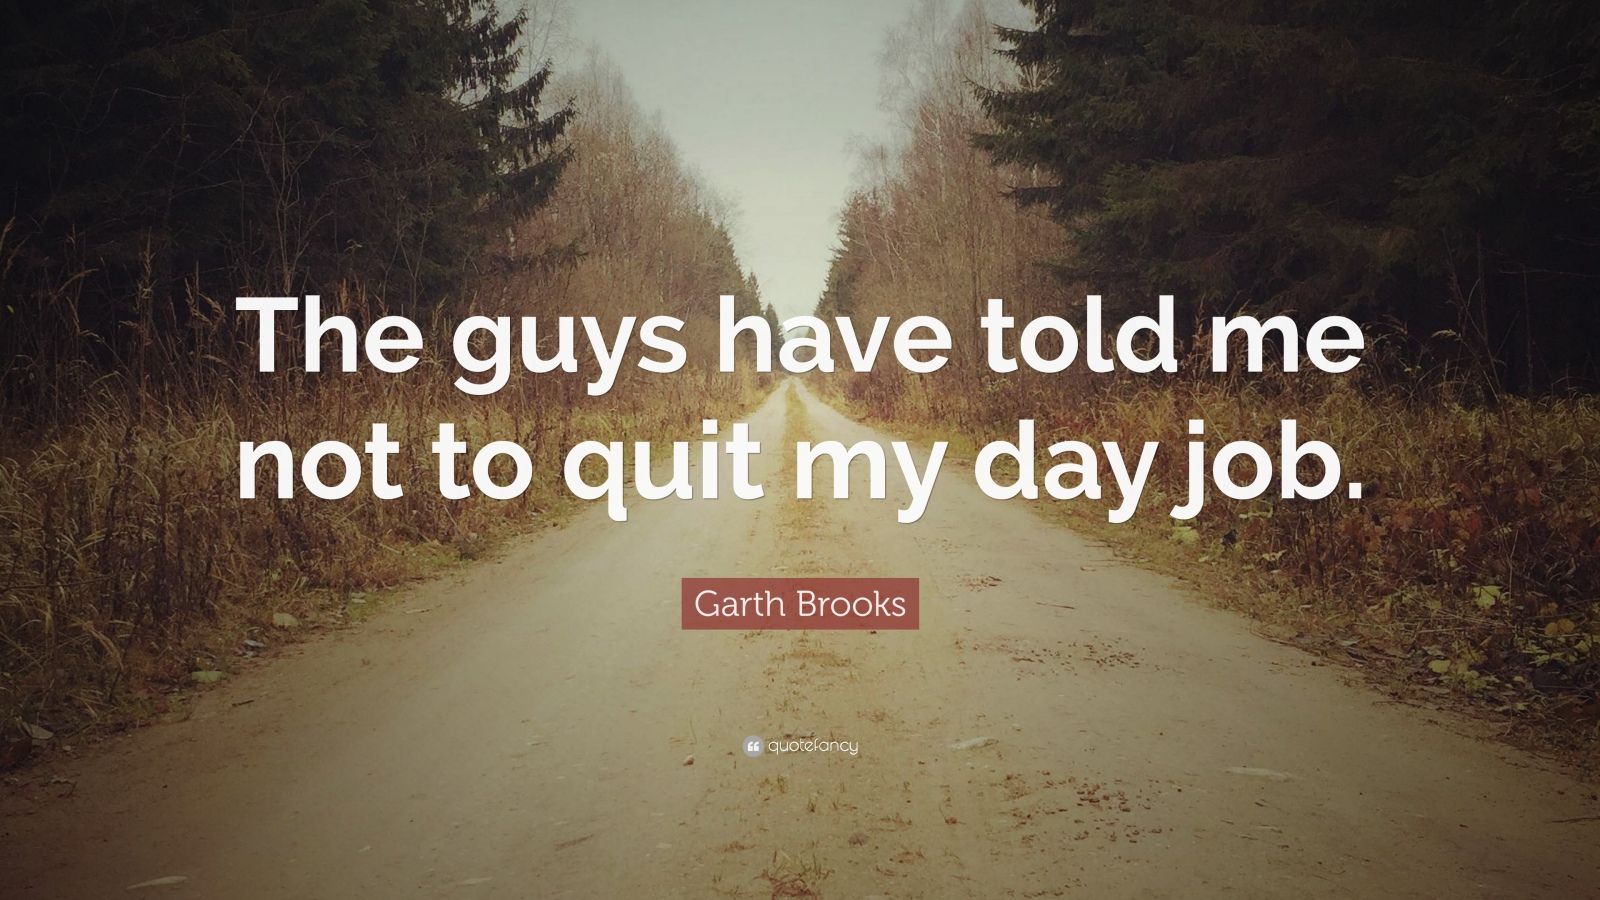 Garth Brooks Quote: “The guys have told me not to quit my day job.” (7